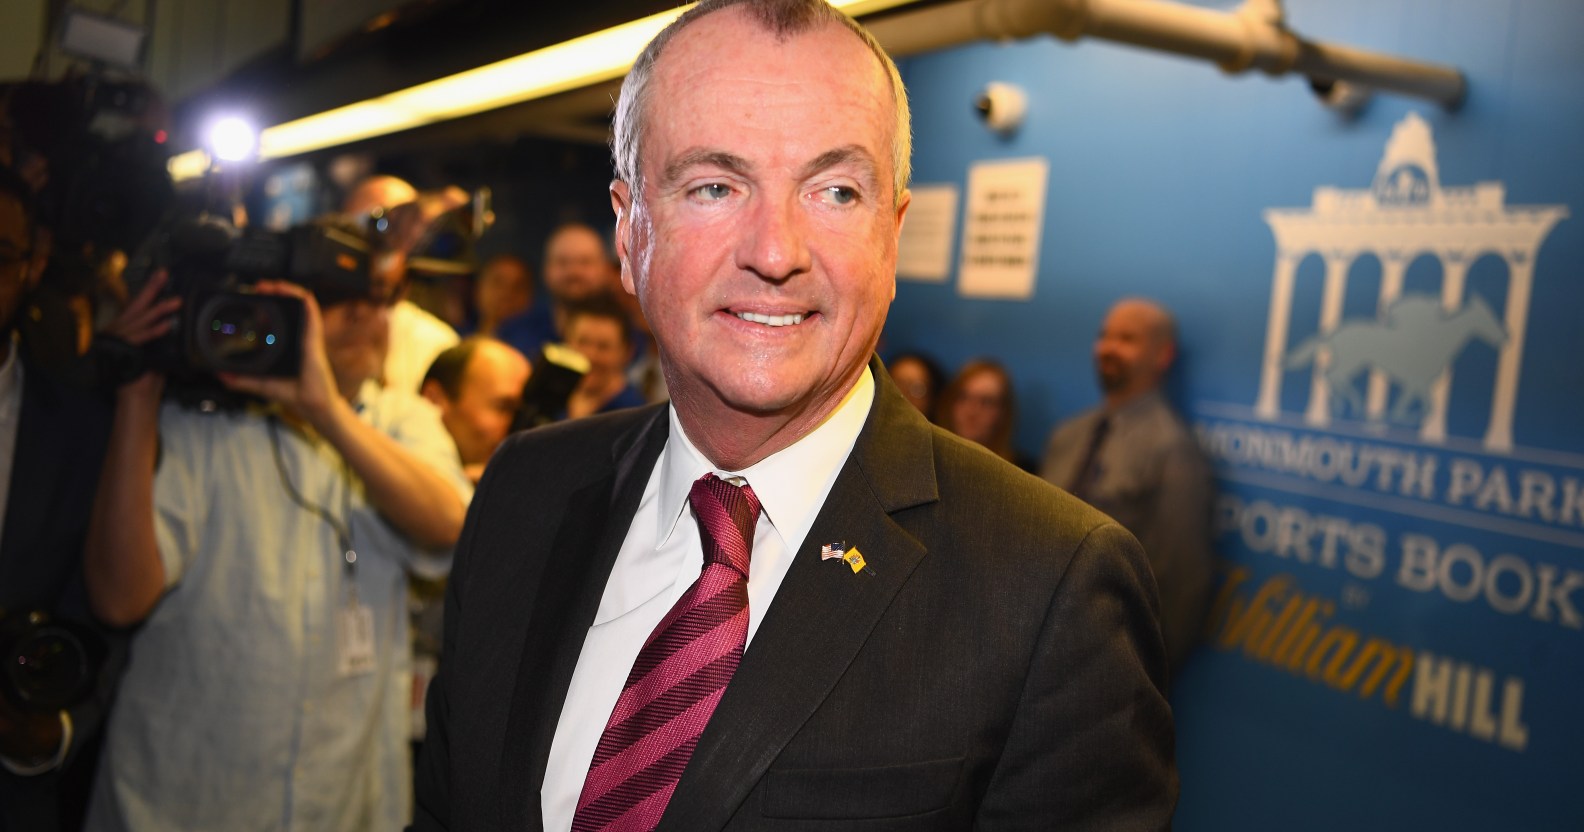 Governor of New Jersey Phil Murphy. (Dave Kotinsky/Getty Images for William Hill Race & Sports Bar )